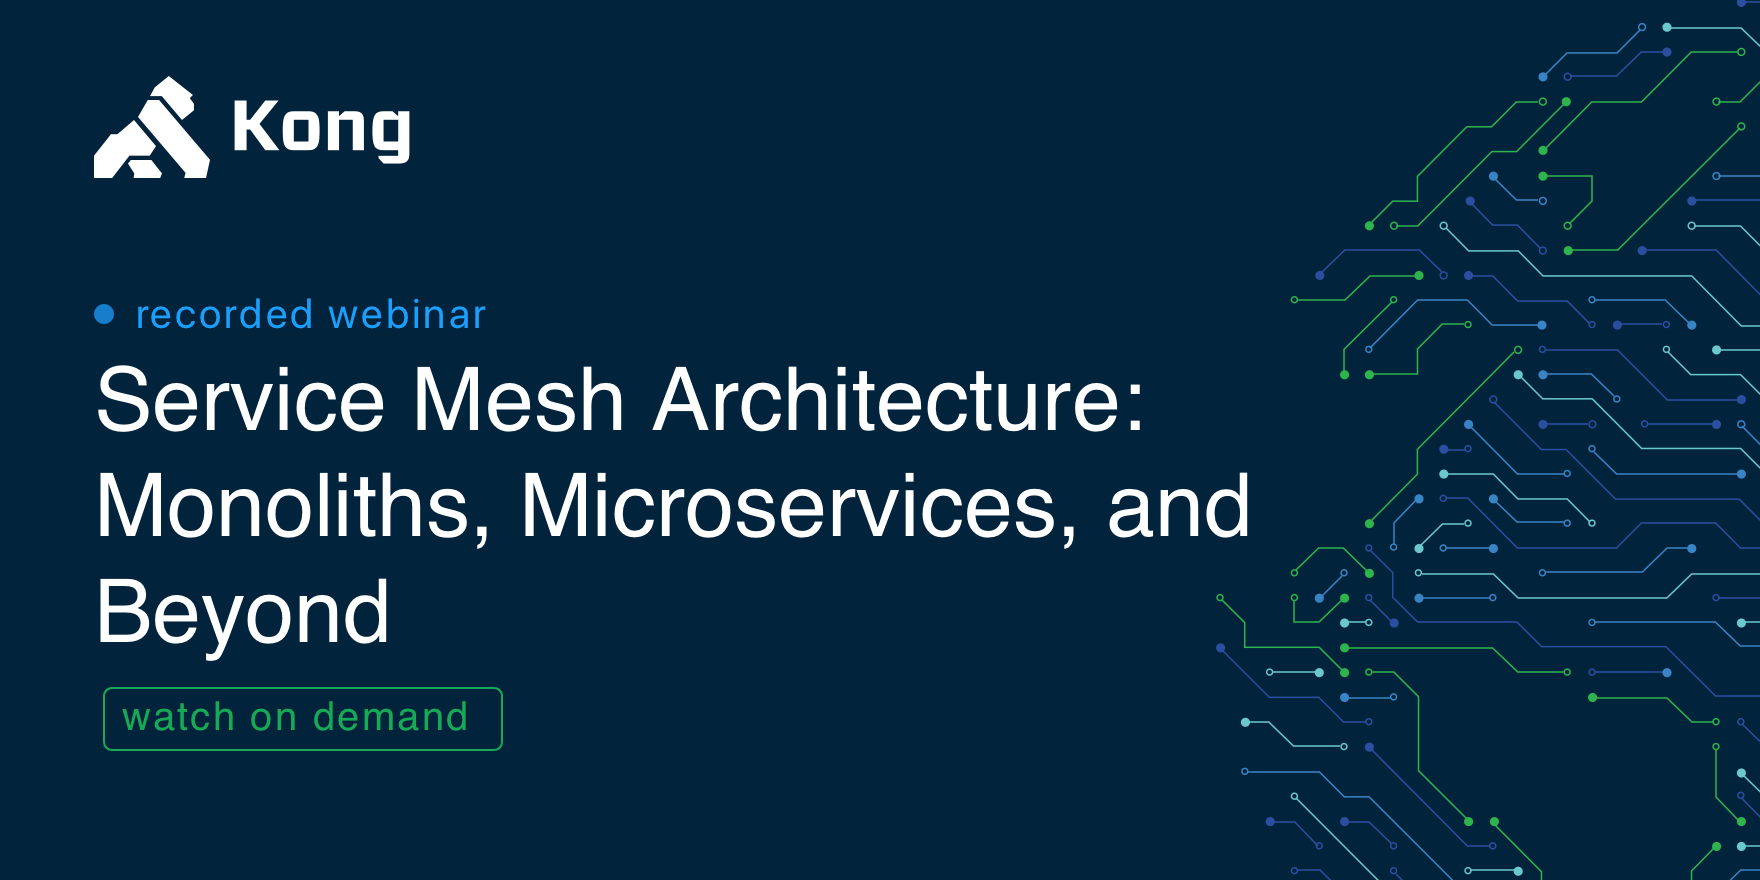 Service Mesh Architecture: Monoliths, Microservices, and Beyond